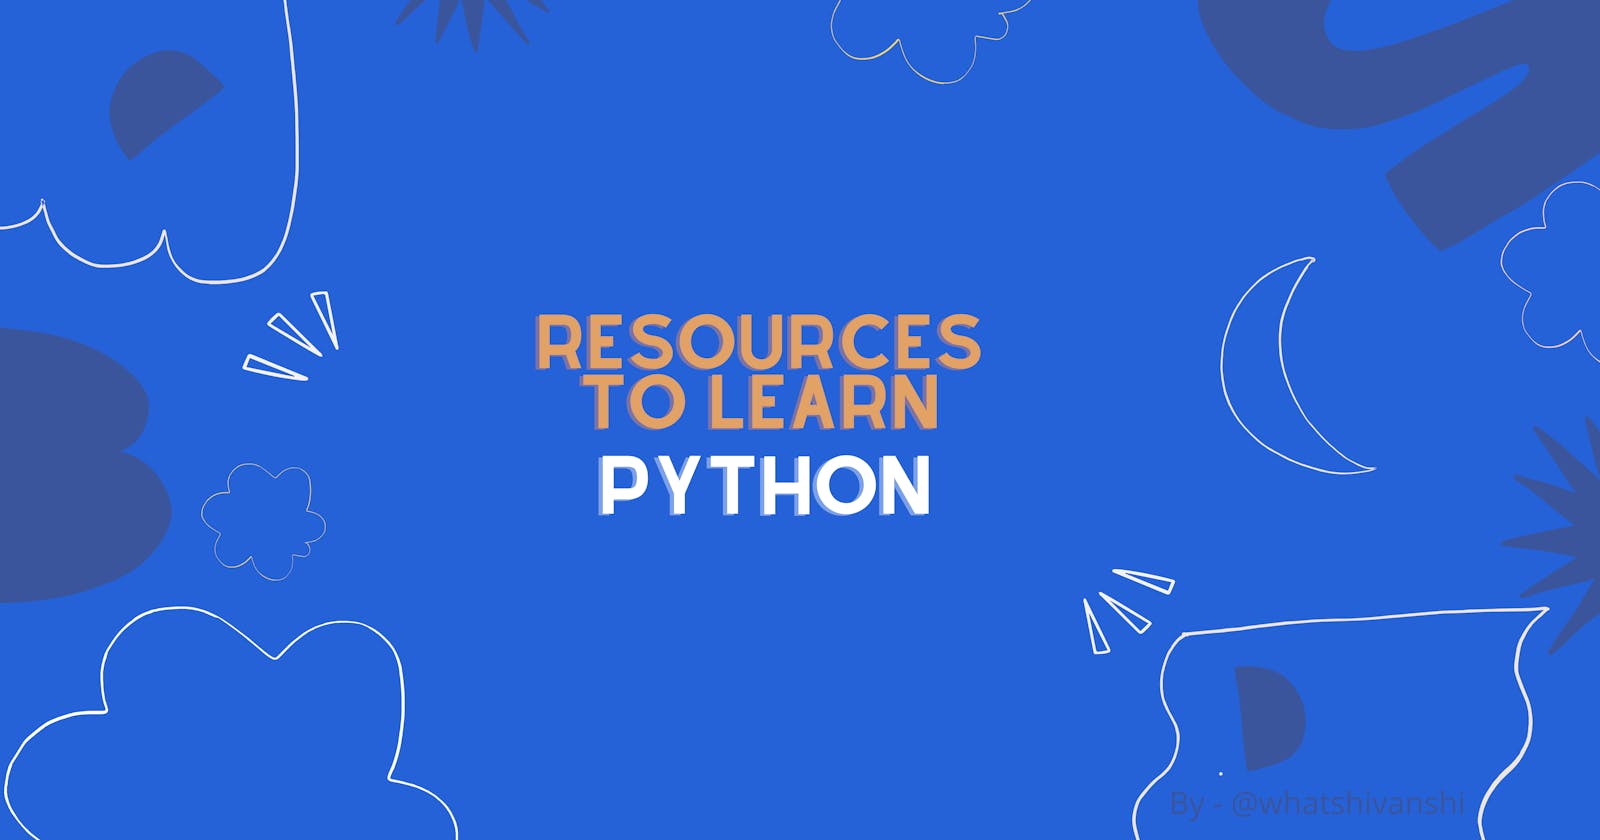 Resources to learn Python this new Year! 🎉